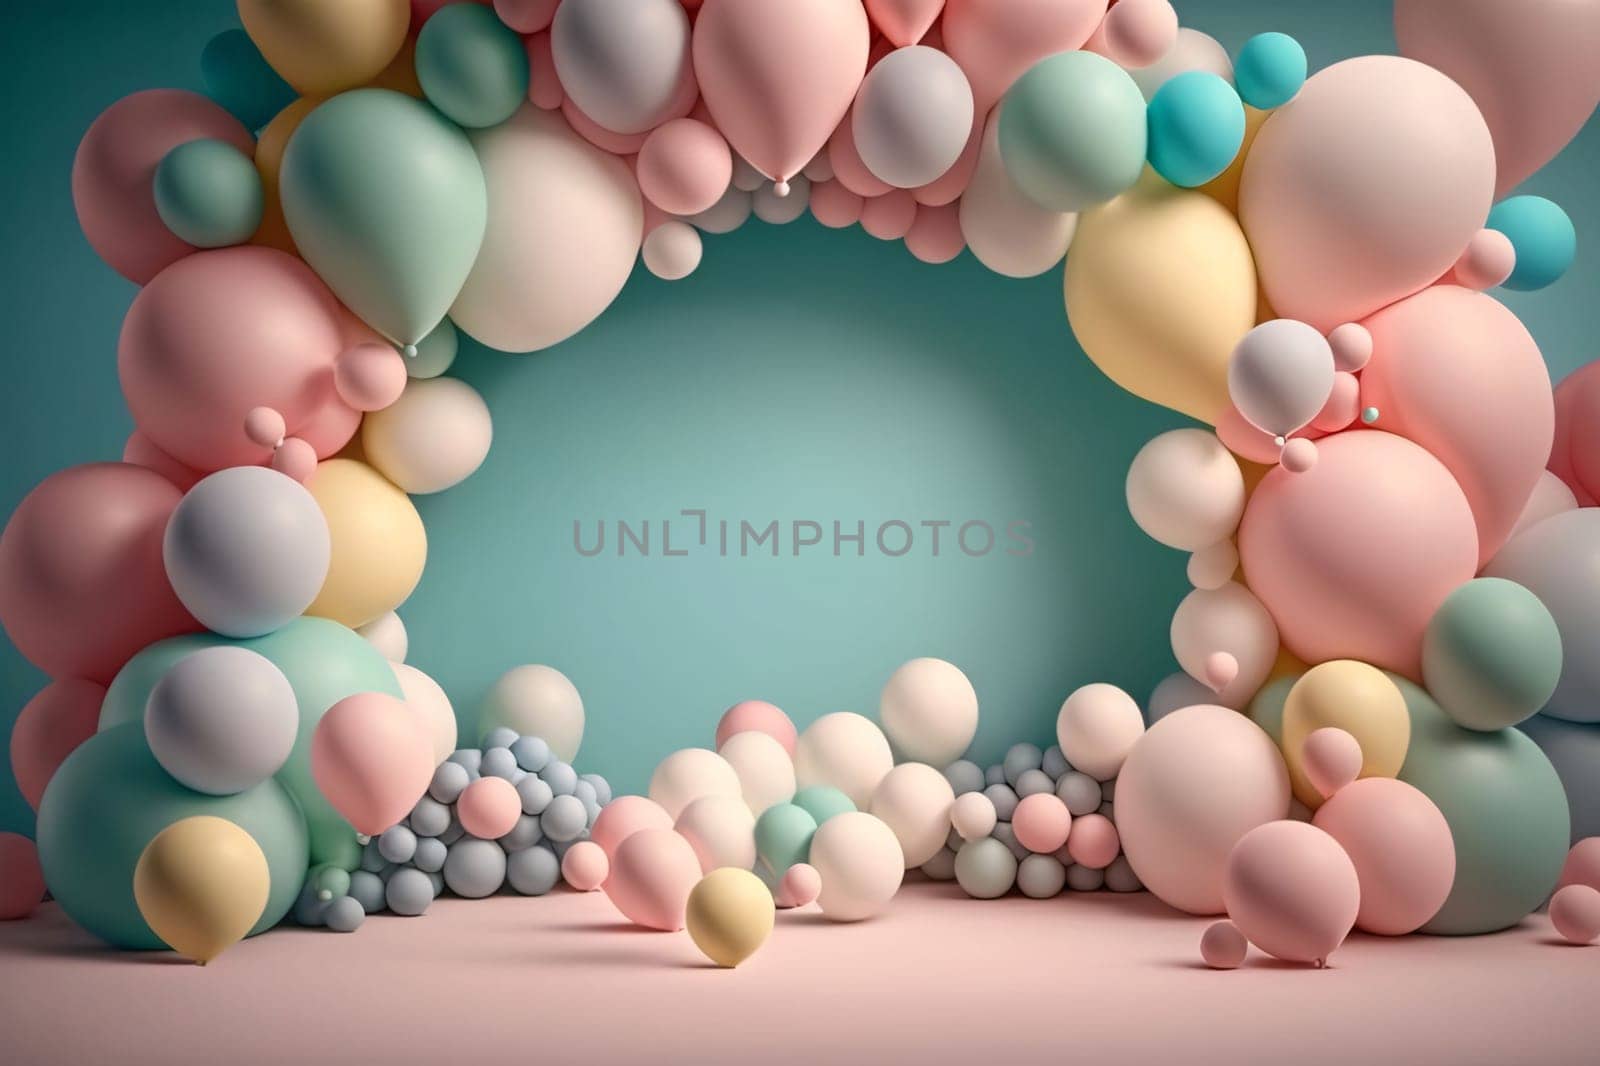 Banner: 3d rendering of pastel pink, blue and white balloons in shape of an arch